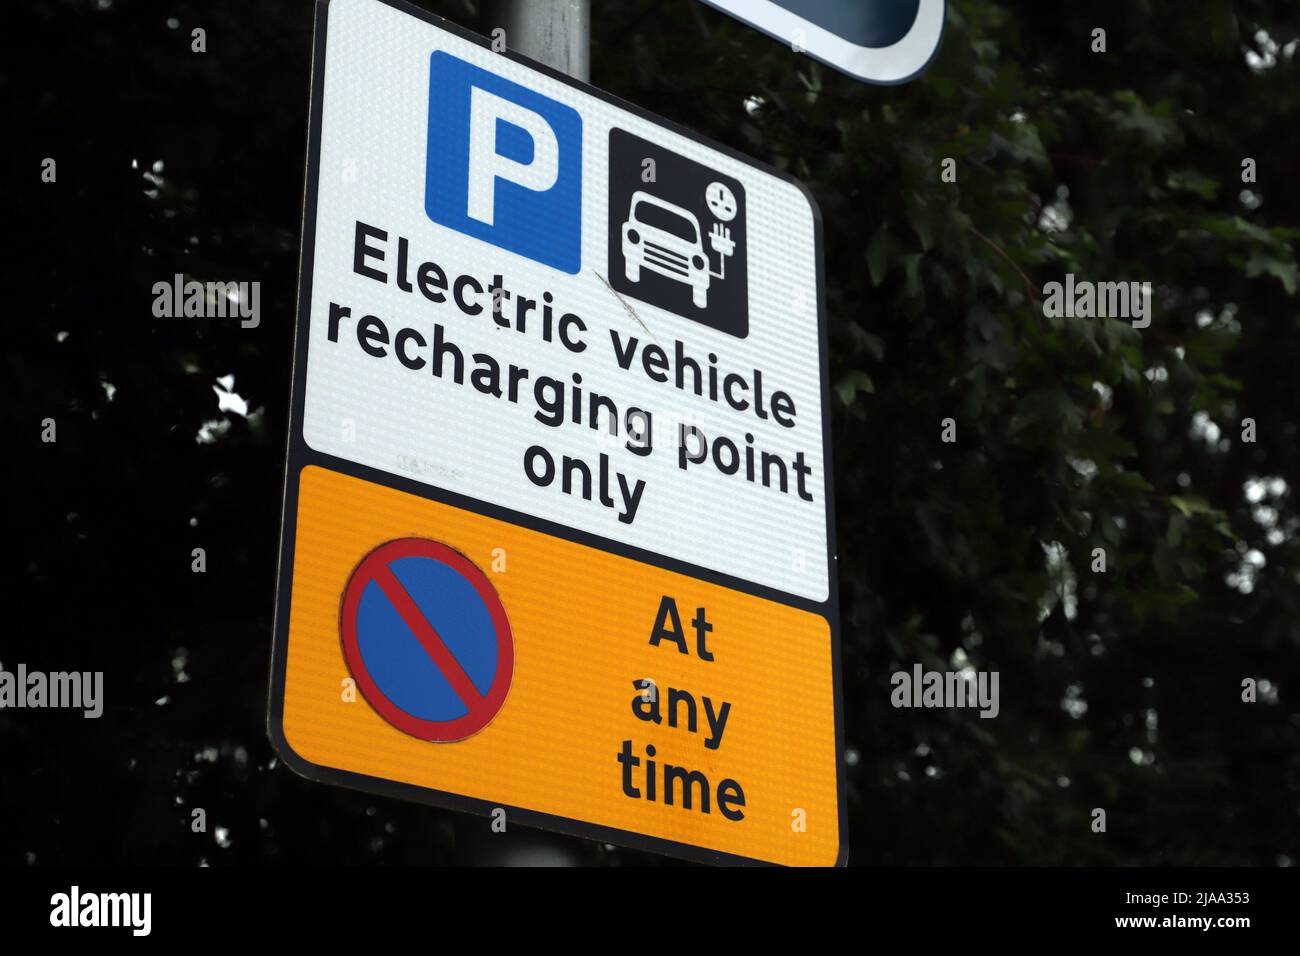 Electric Vehicle Charging Station Sign at Donington Park Services on the M1 morotway Stock Photo